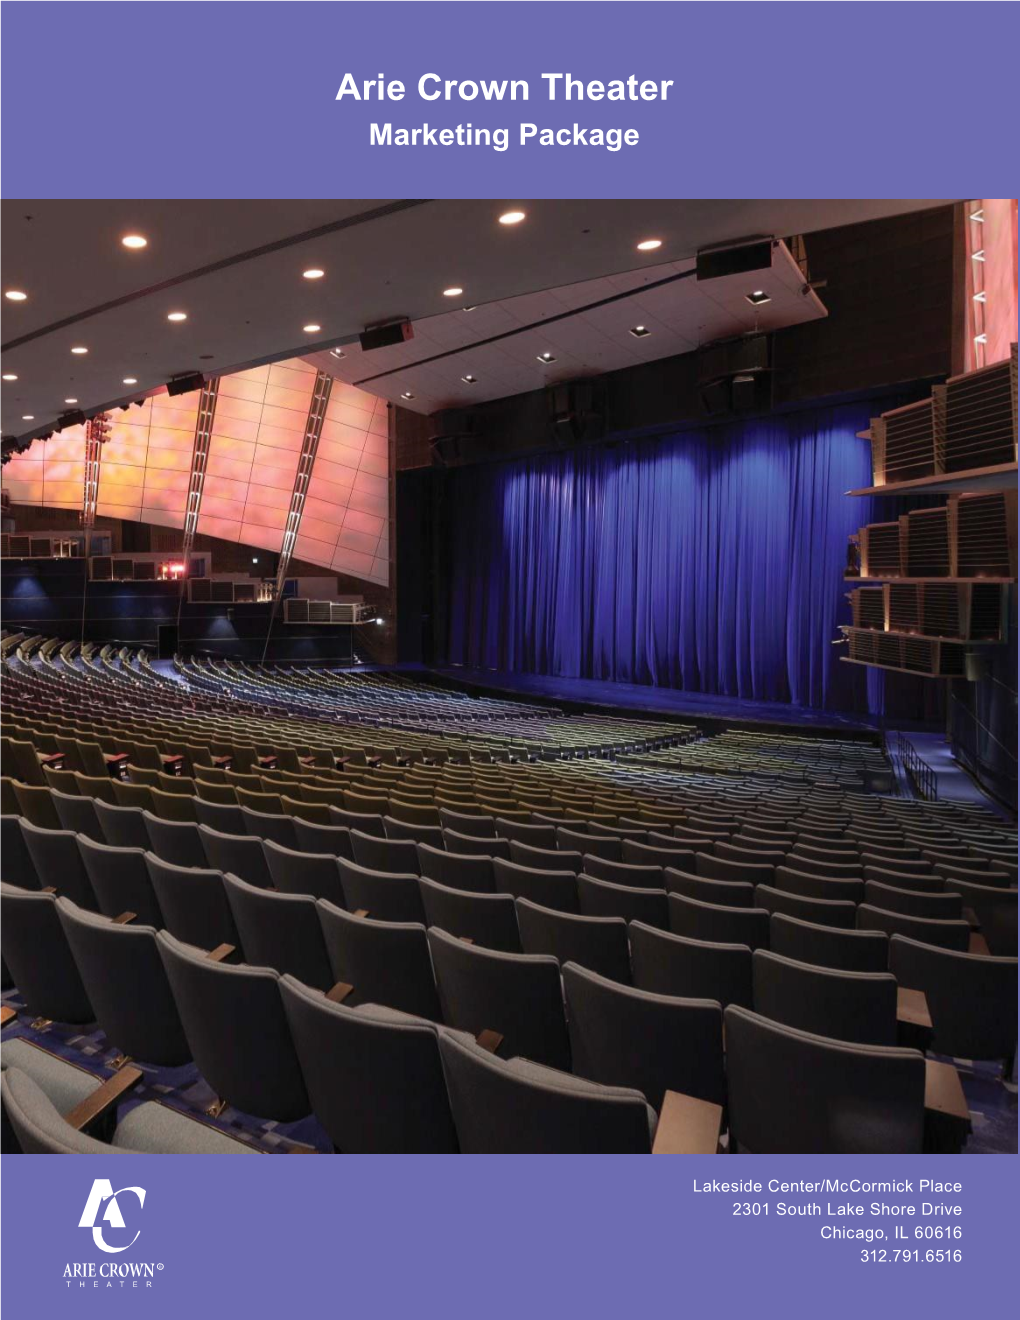 Arie Crown Theater Marketing Package